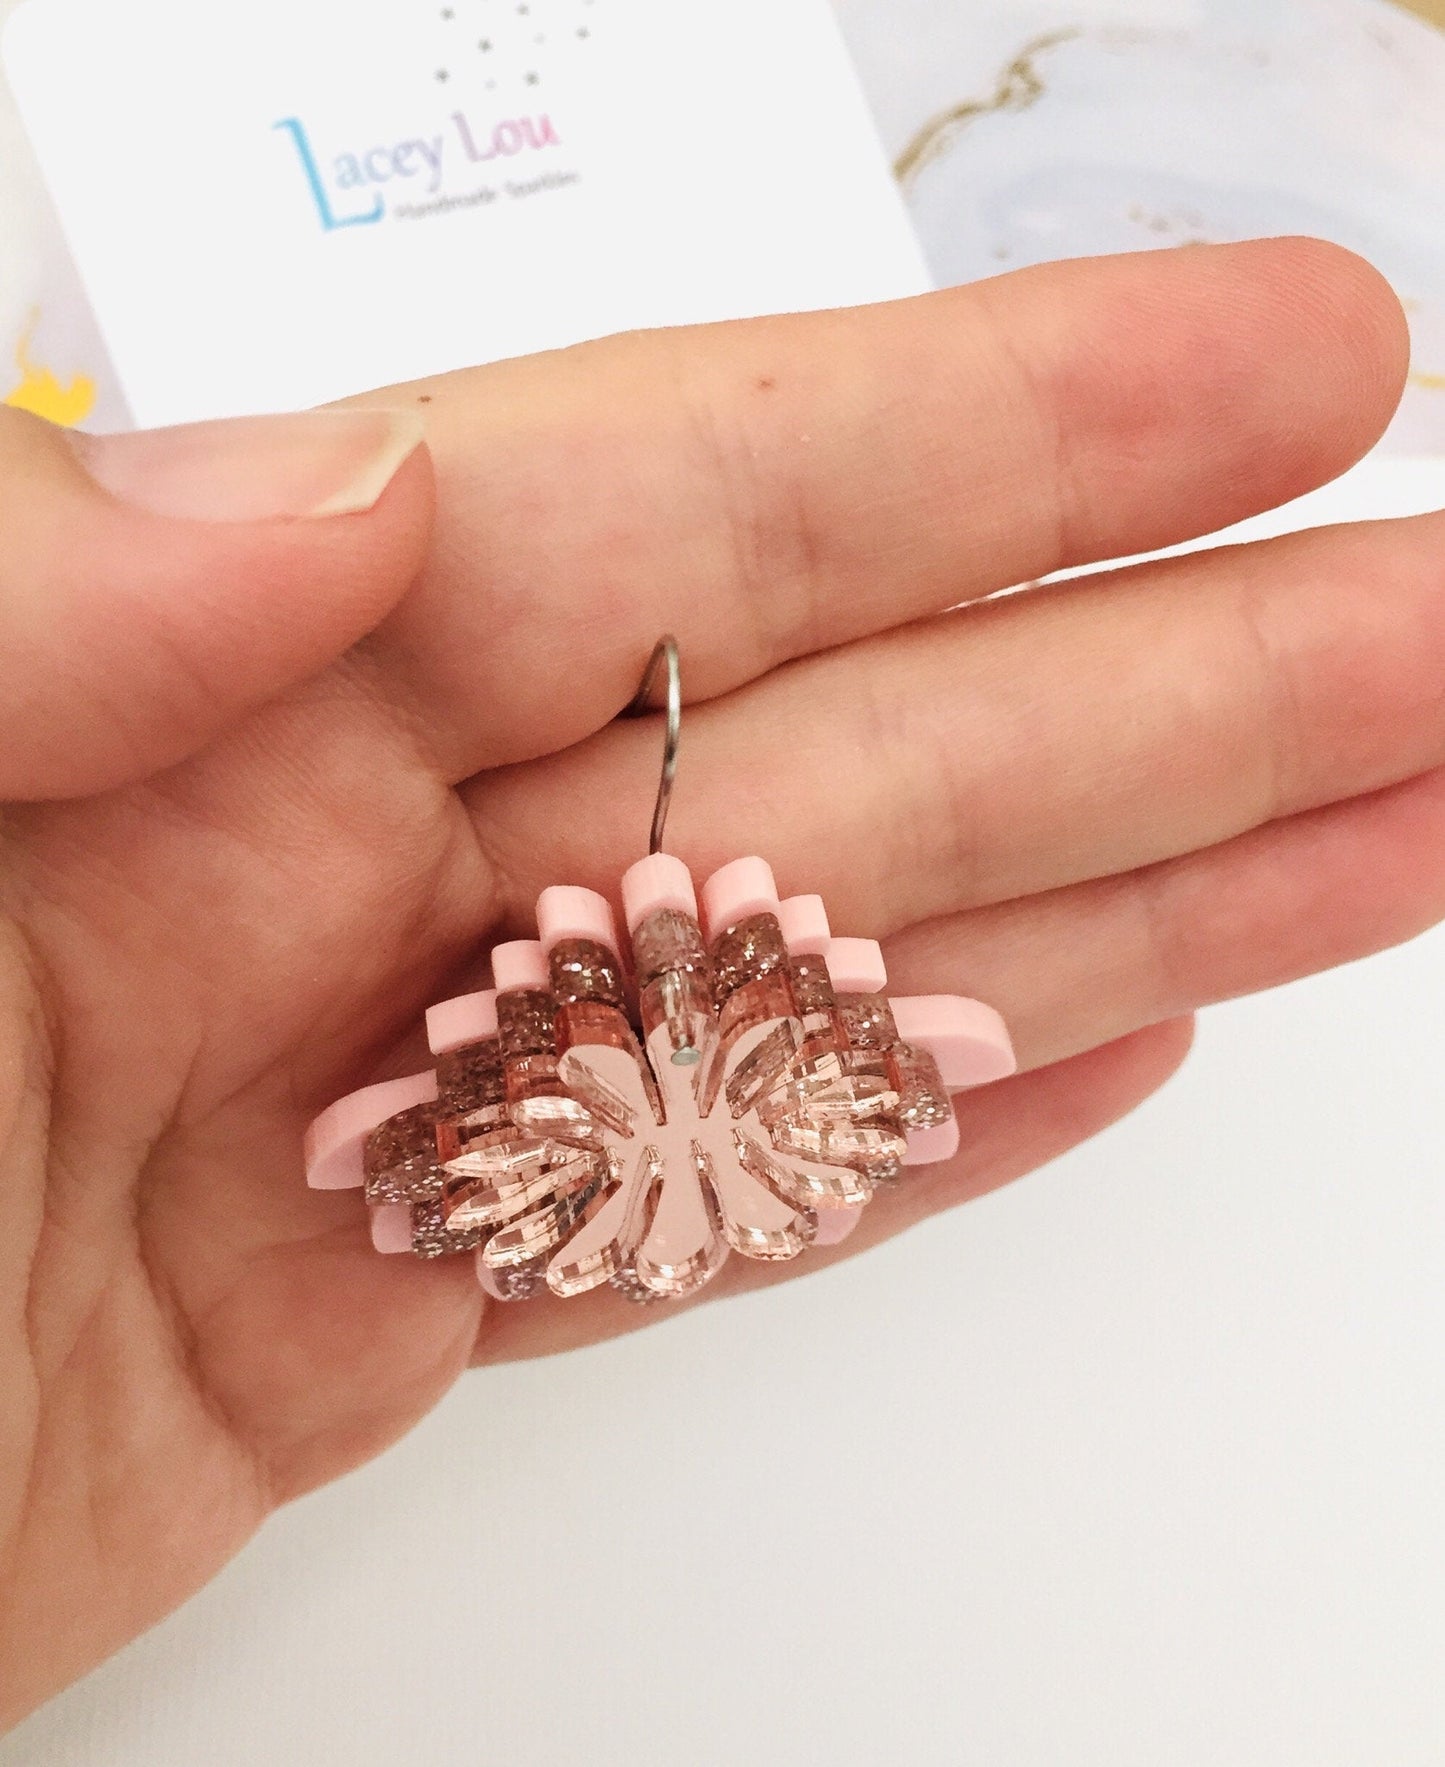 Large Flower Frill Statement Earrings - Rose Gold and Pink - Lacey Lou Sparkles